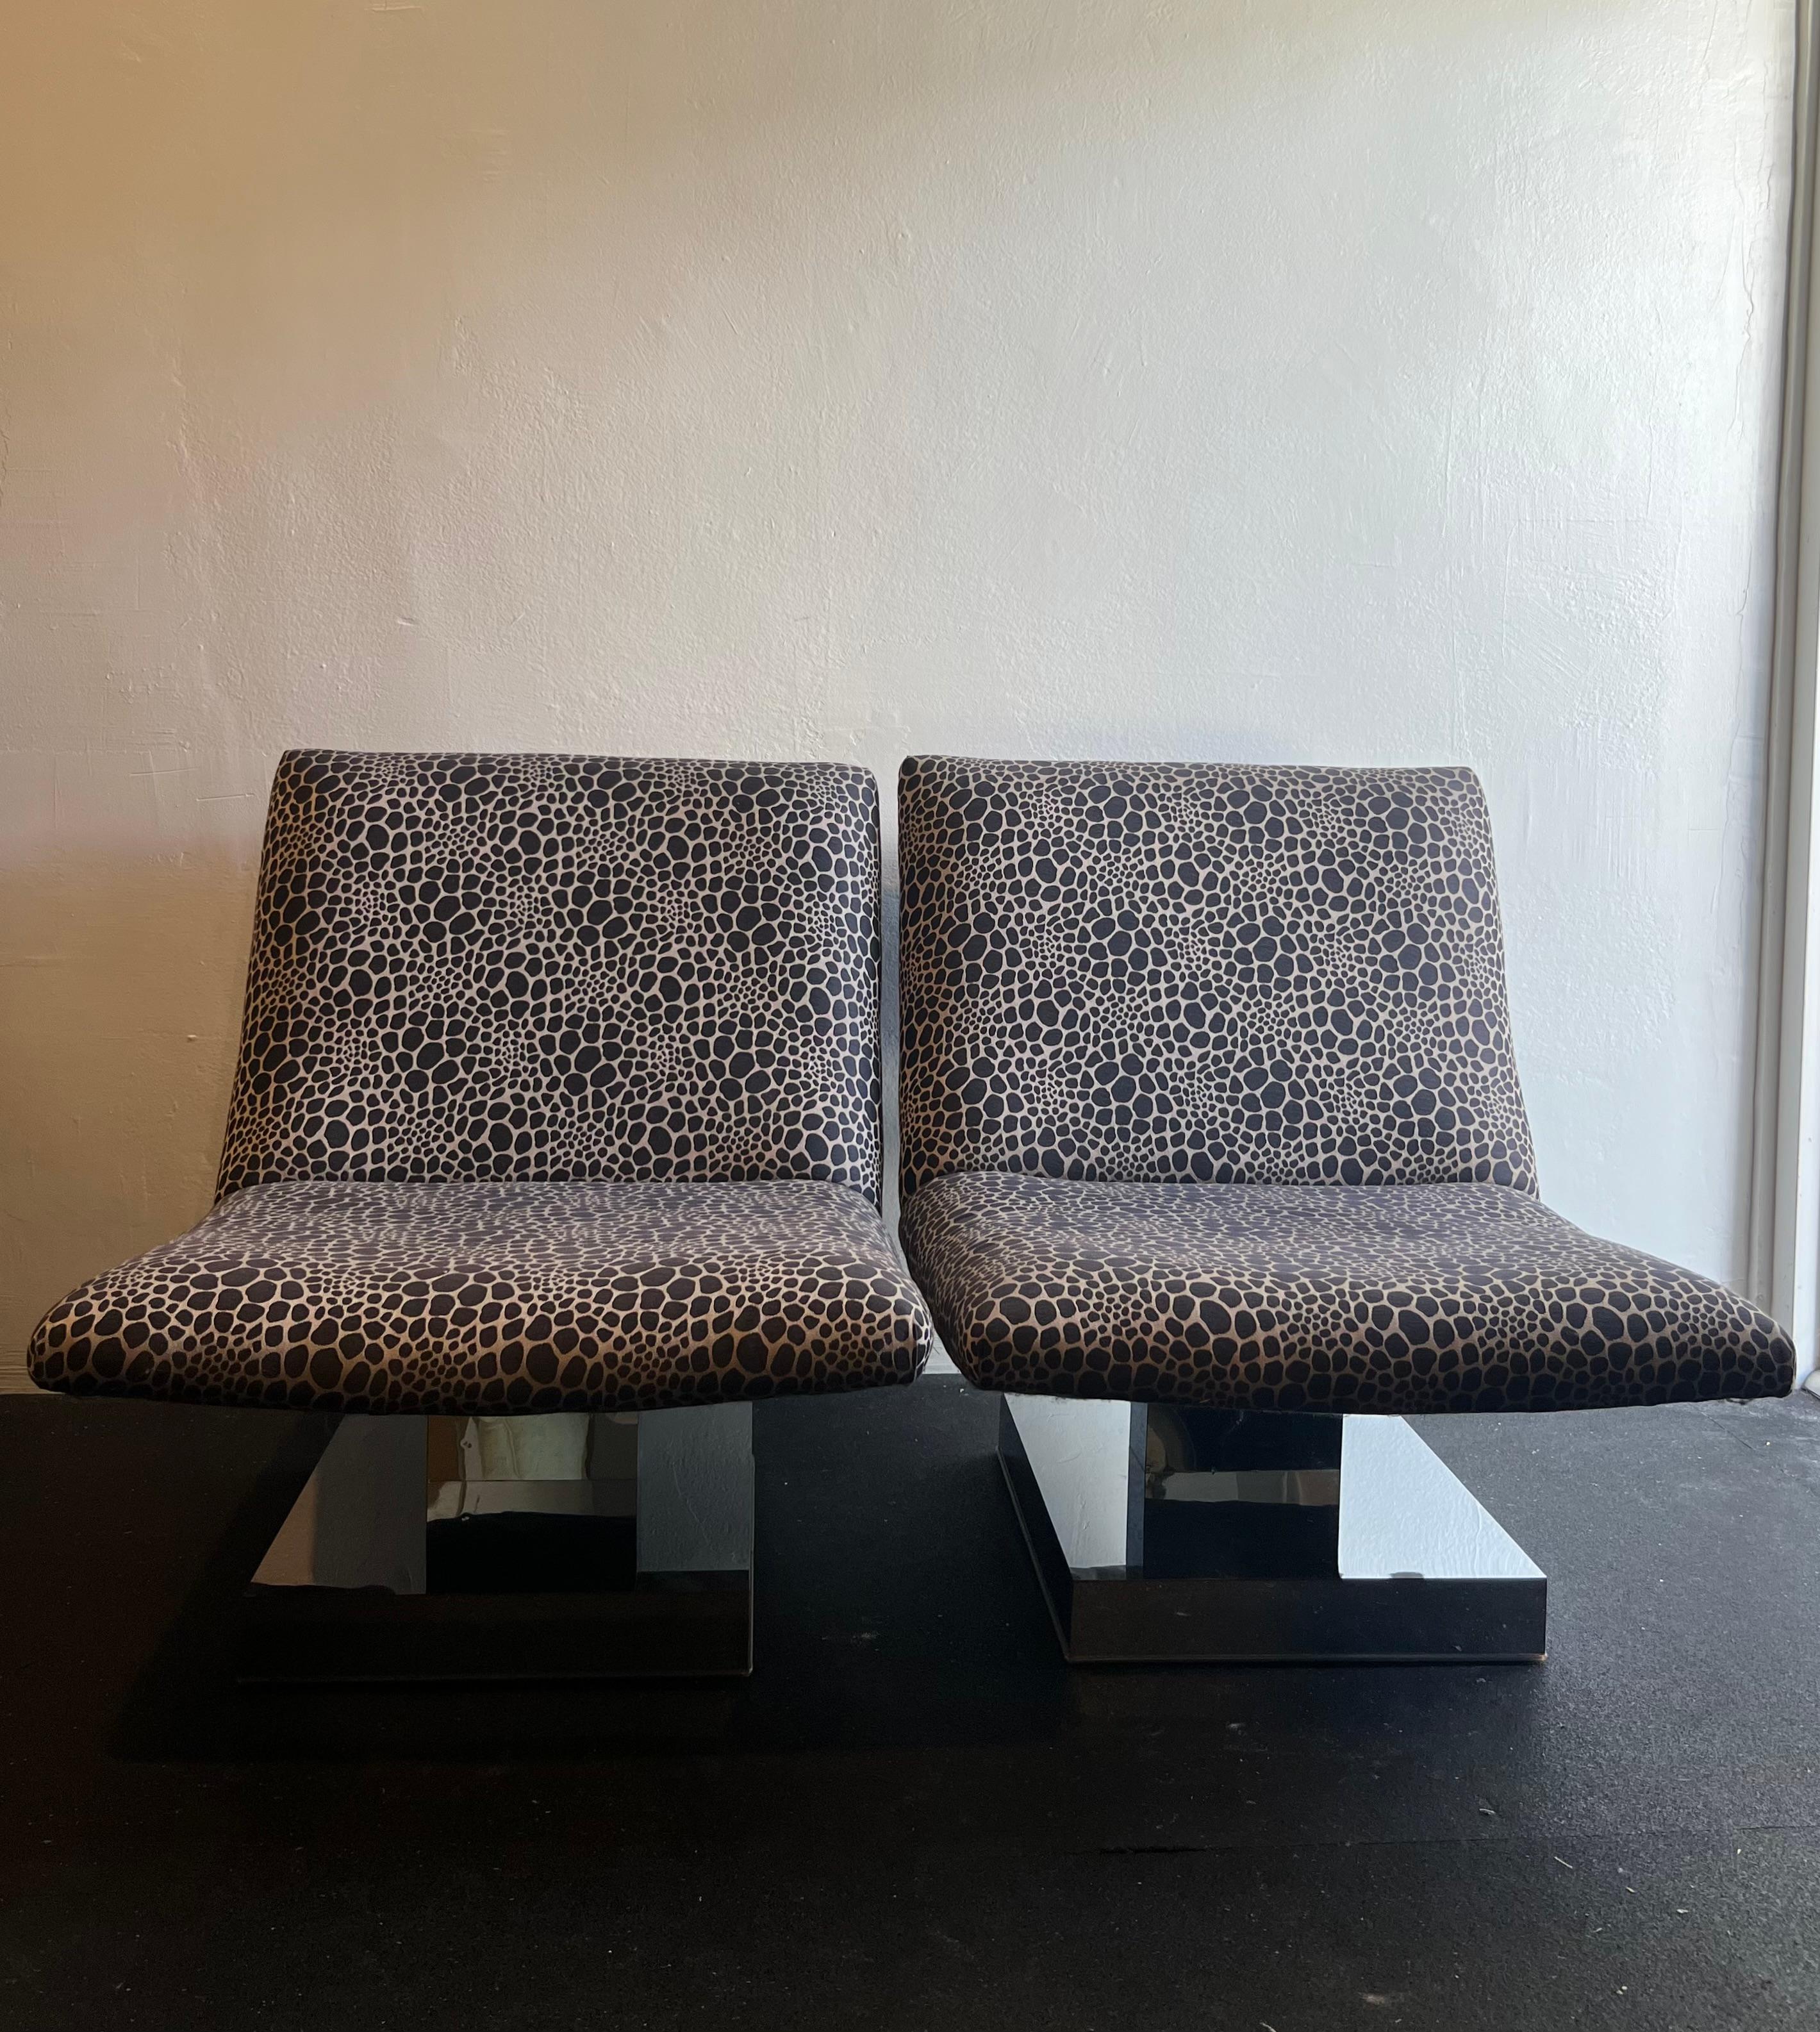 Pair of Milo Baughman for Thayer Coggin chrome lounge chairs. Oversized frames seat very comfortably. Chairs have been reupholstered within the last few years by the previous owners. Original order label in tact underneath one chair. Original rubber